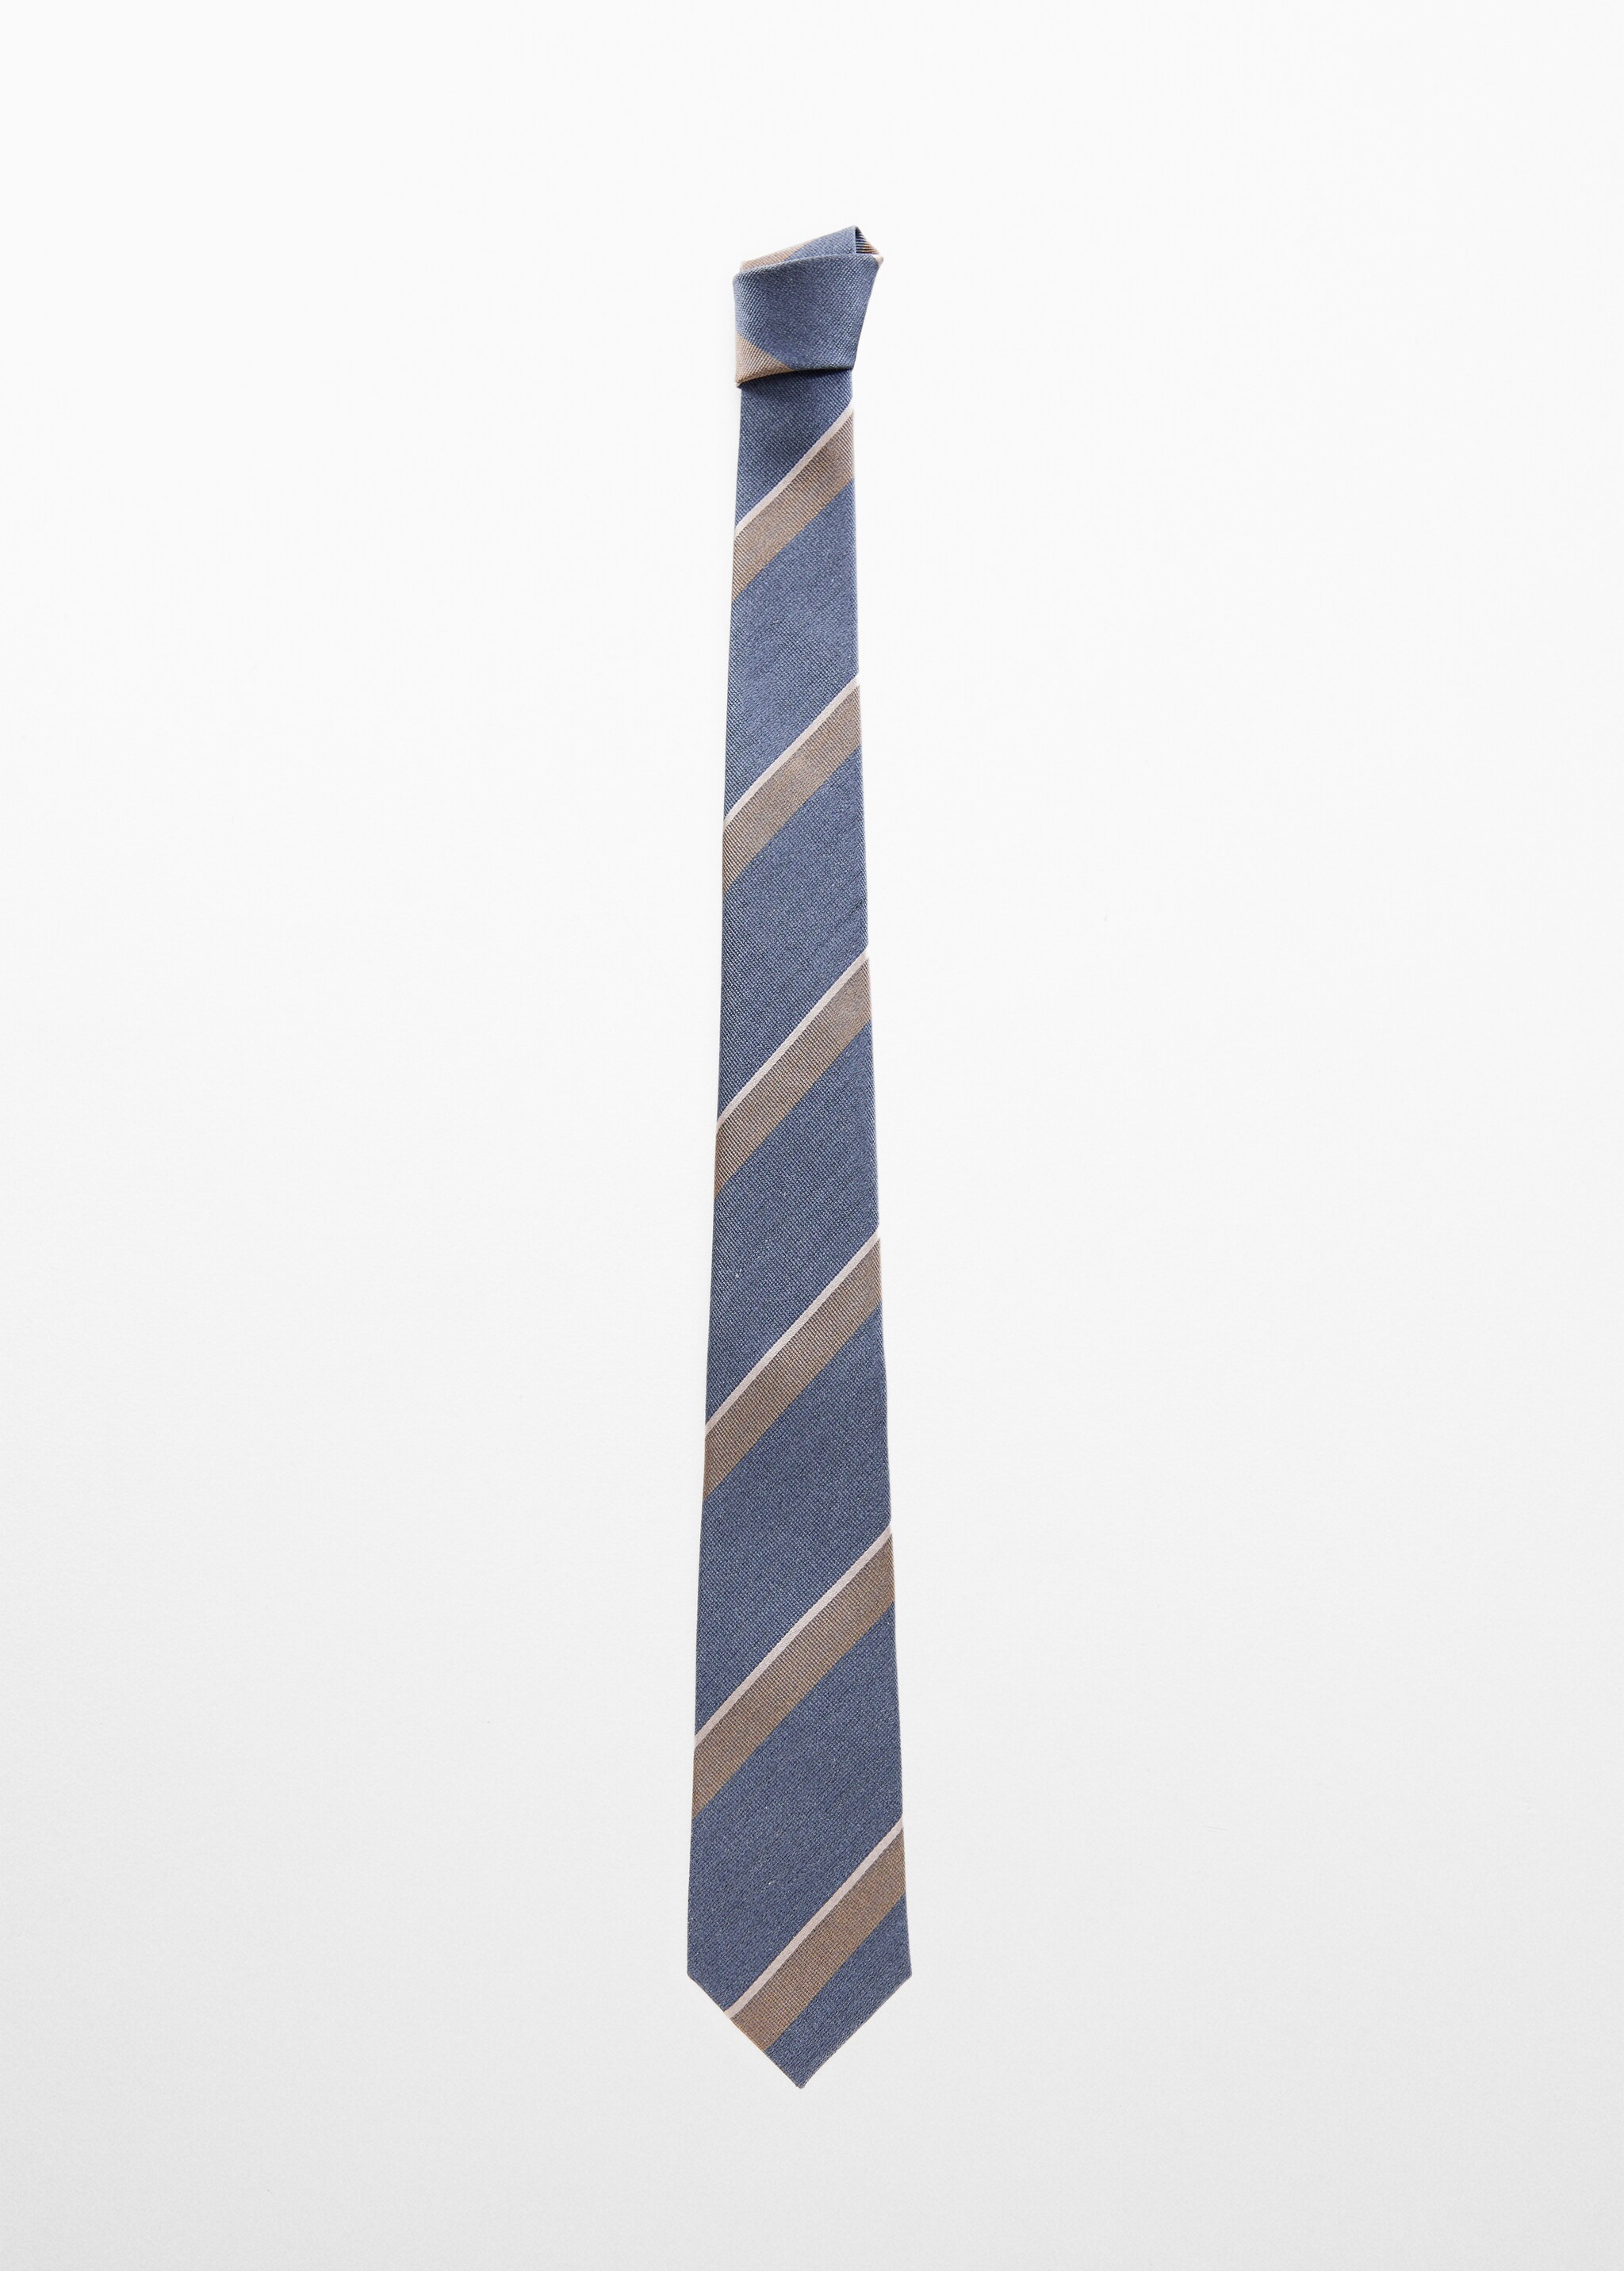 Crease-resistant silk tie - Article without model